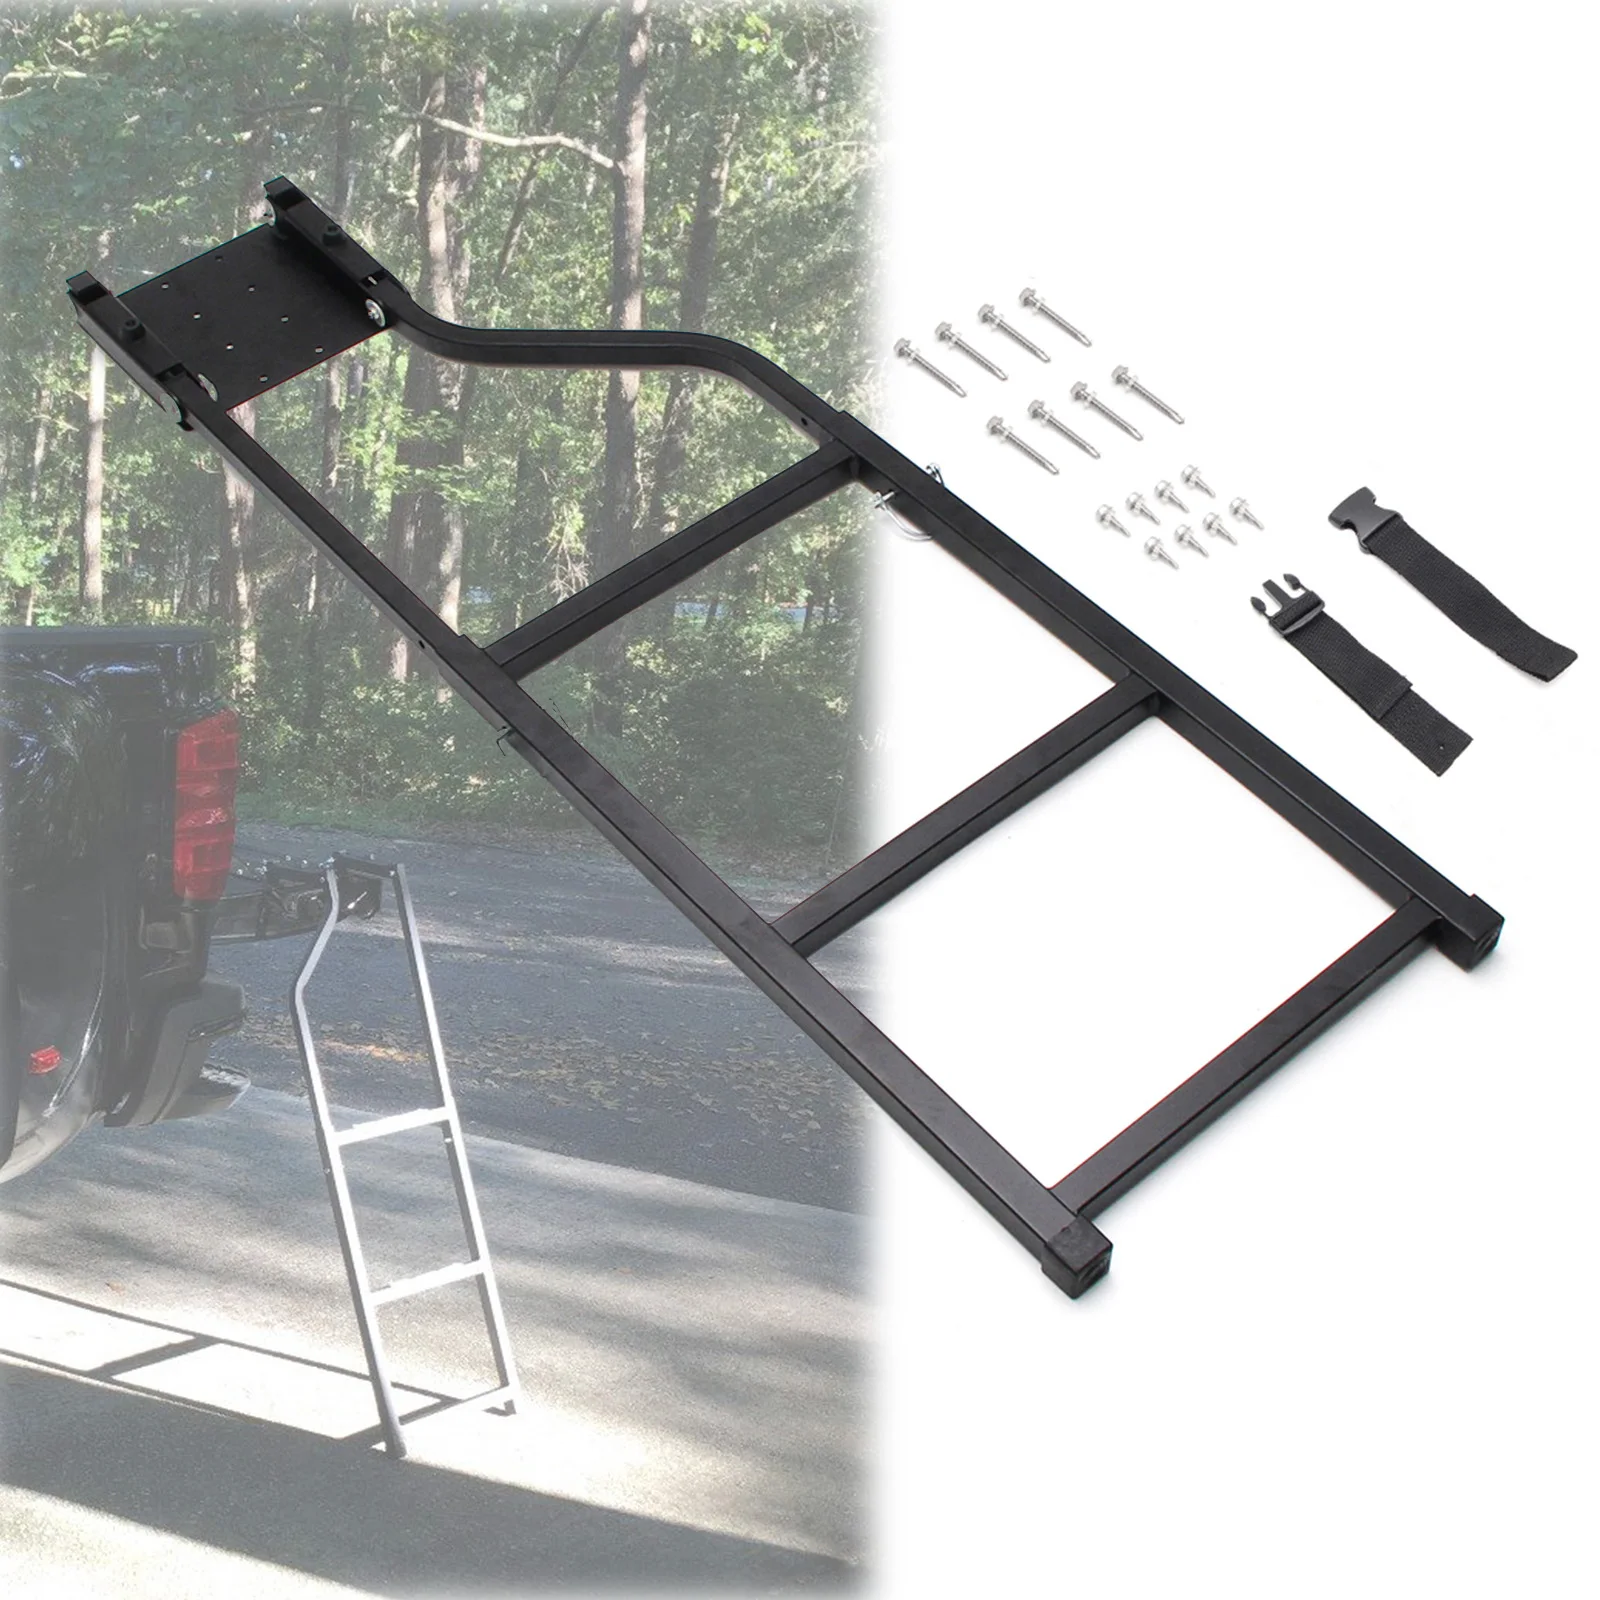 1 pcs Pickup Tailgate Step Cargo Accessories Truck Bed Ladder Universal Extension Step Ladder with Stainless Steel Self Drilling universal truck tailgate ladder pickup foldable extension step ladder 87 107cm 4x4 accessories